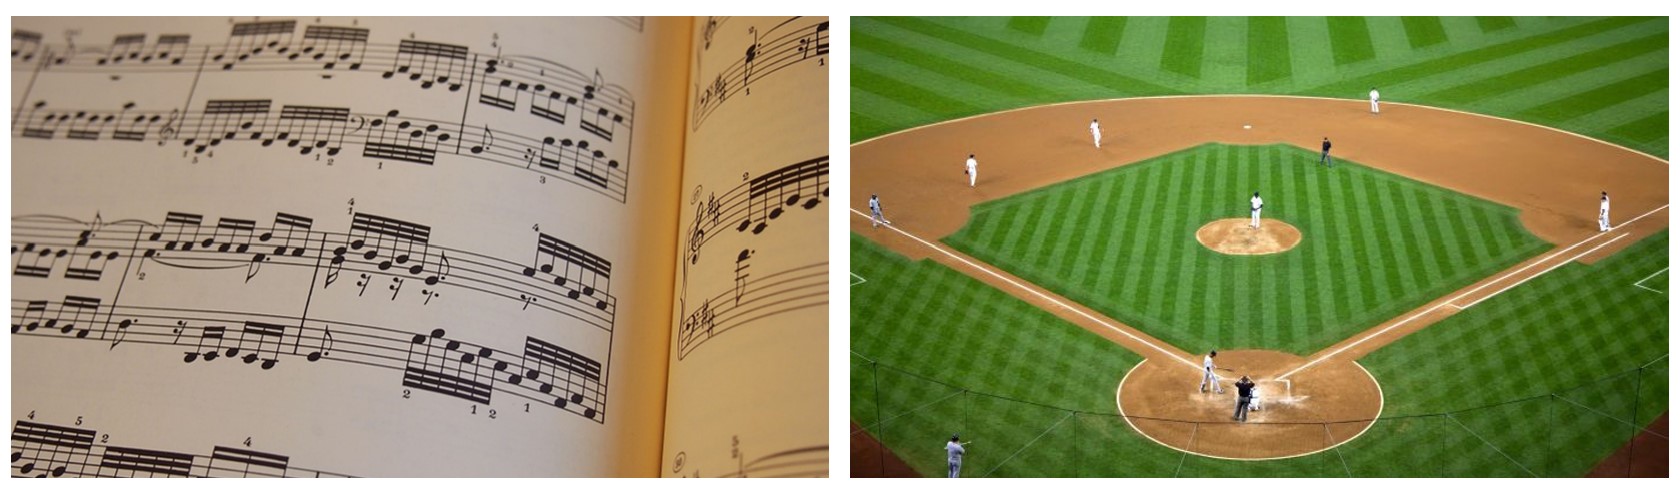 What if math was taught more like how music or sports are taught?